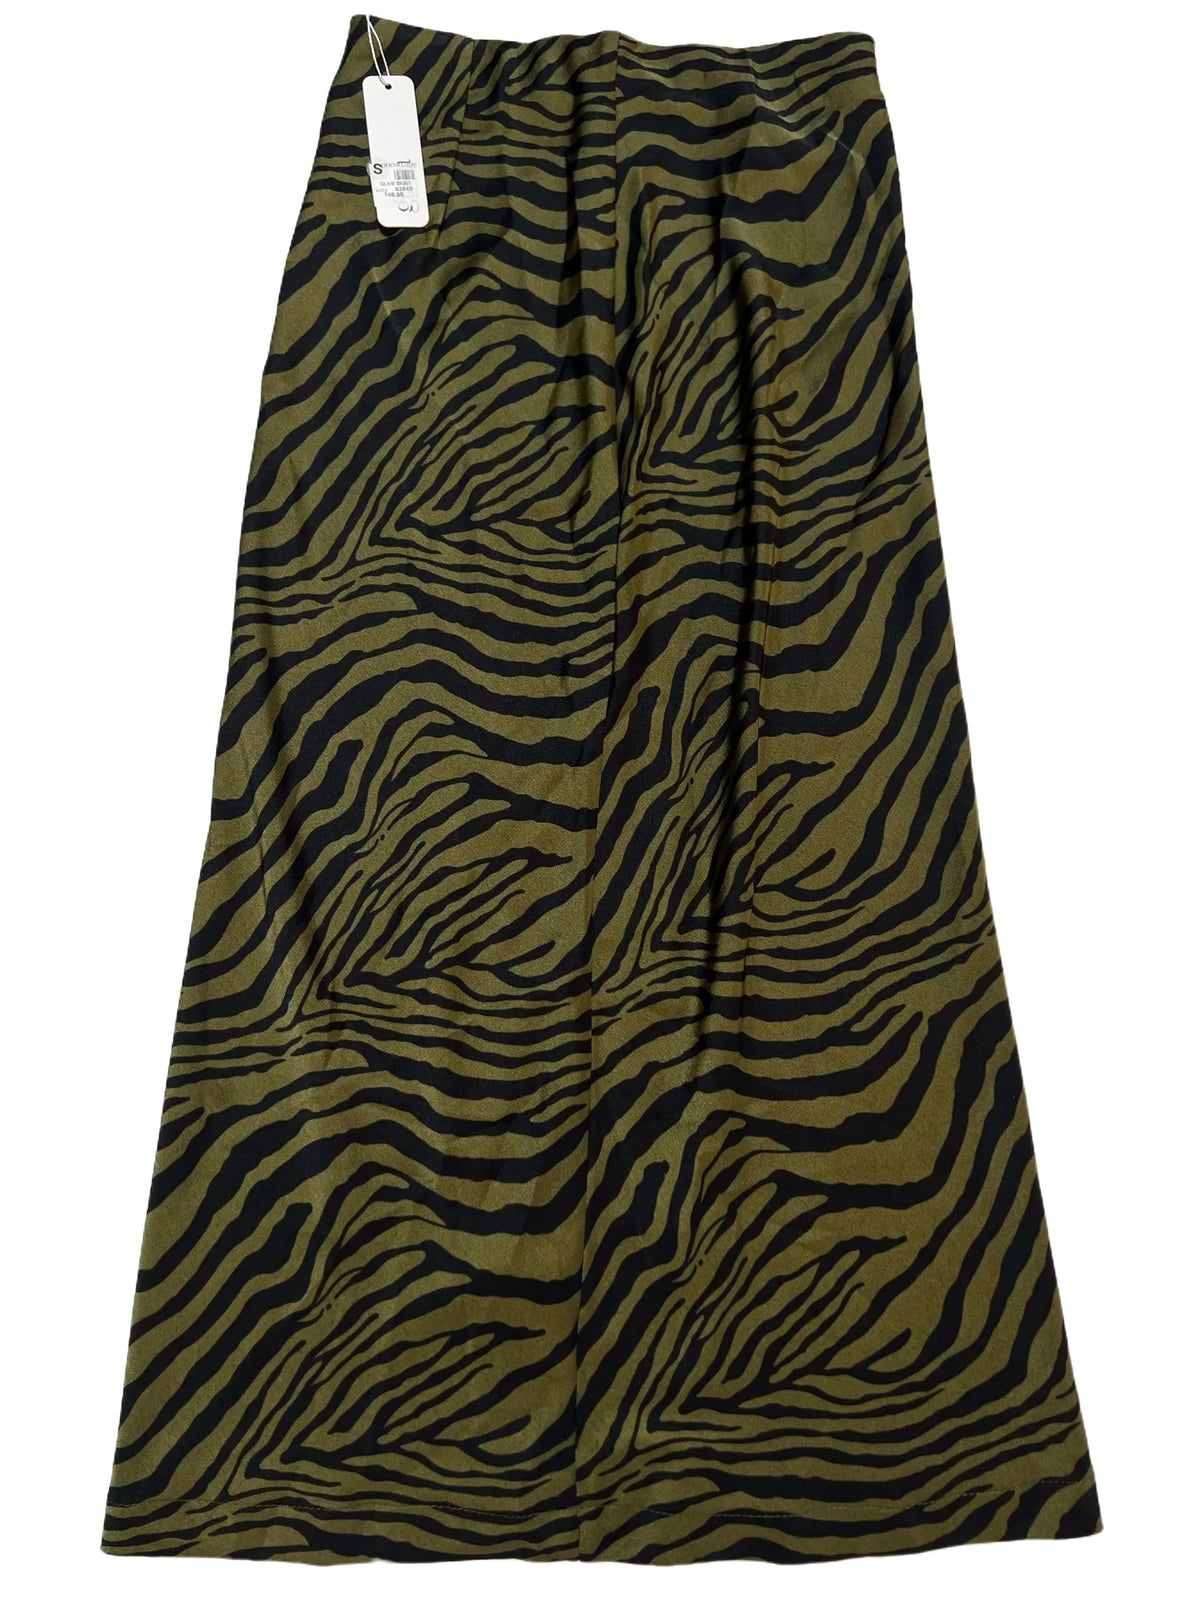 Glam- Green Zebra Midi Skirt NEW WITH TAGS